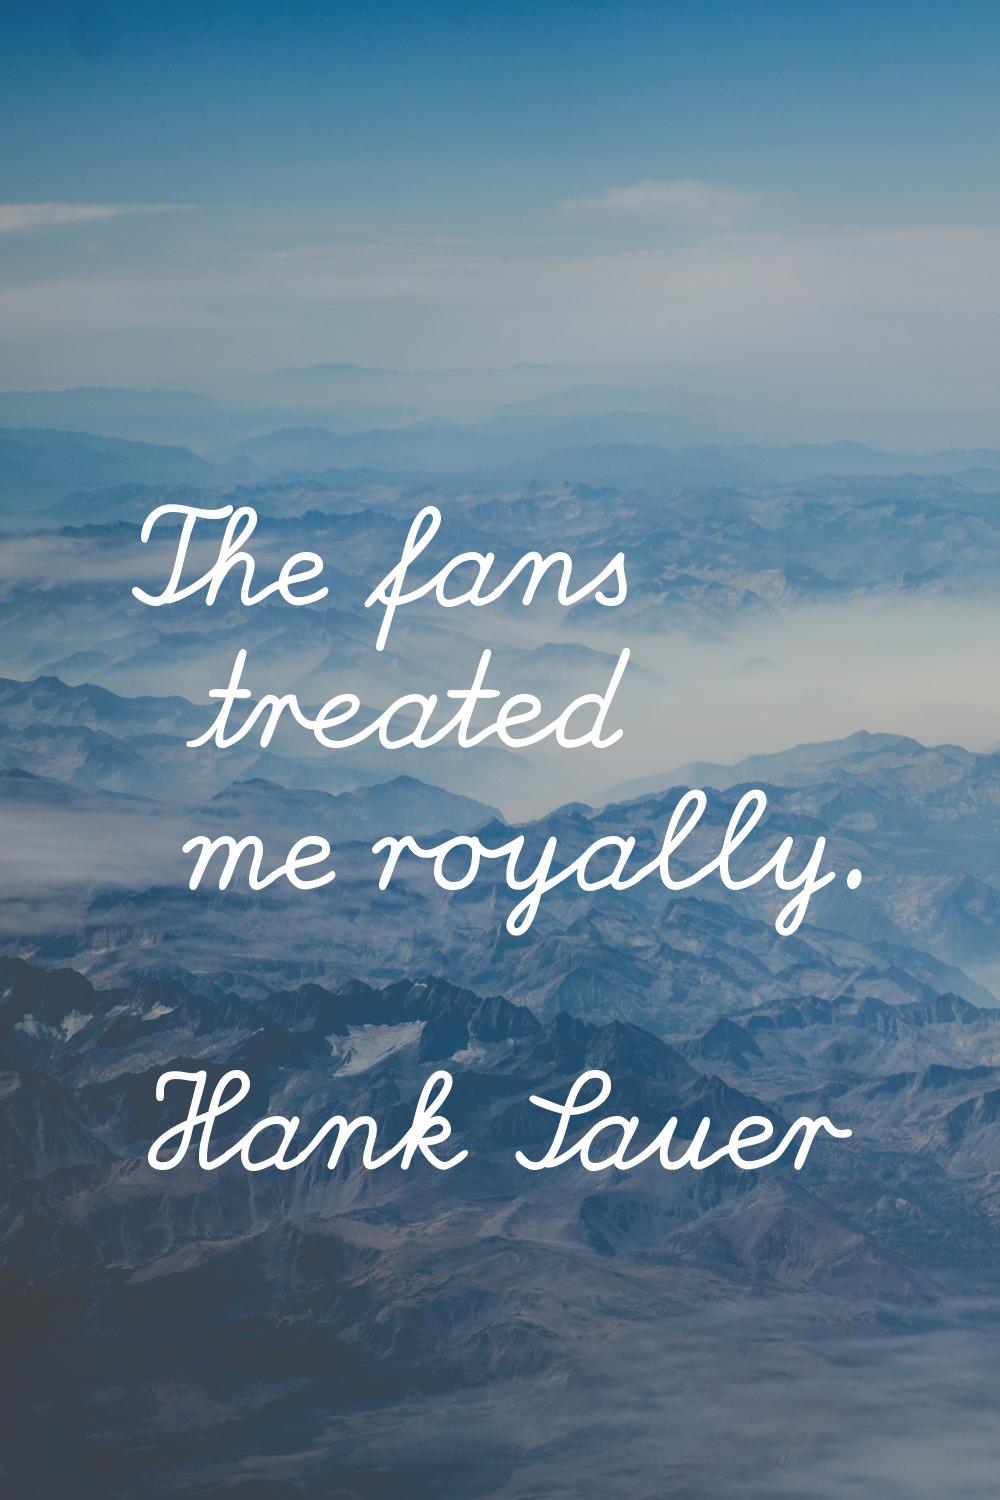 The fans treated me royally.